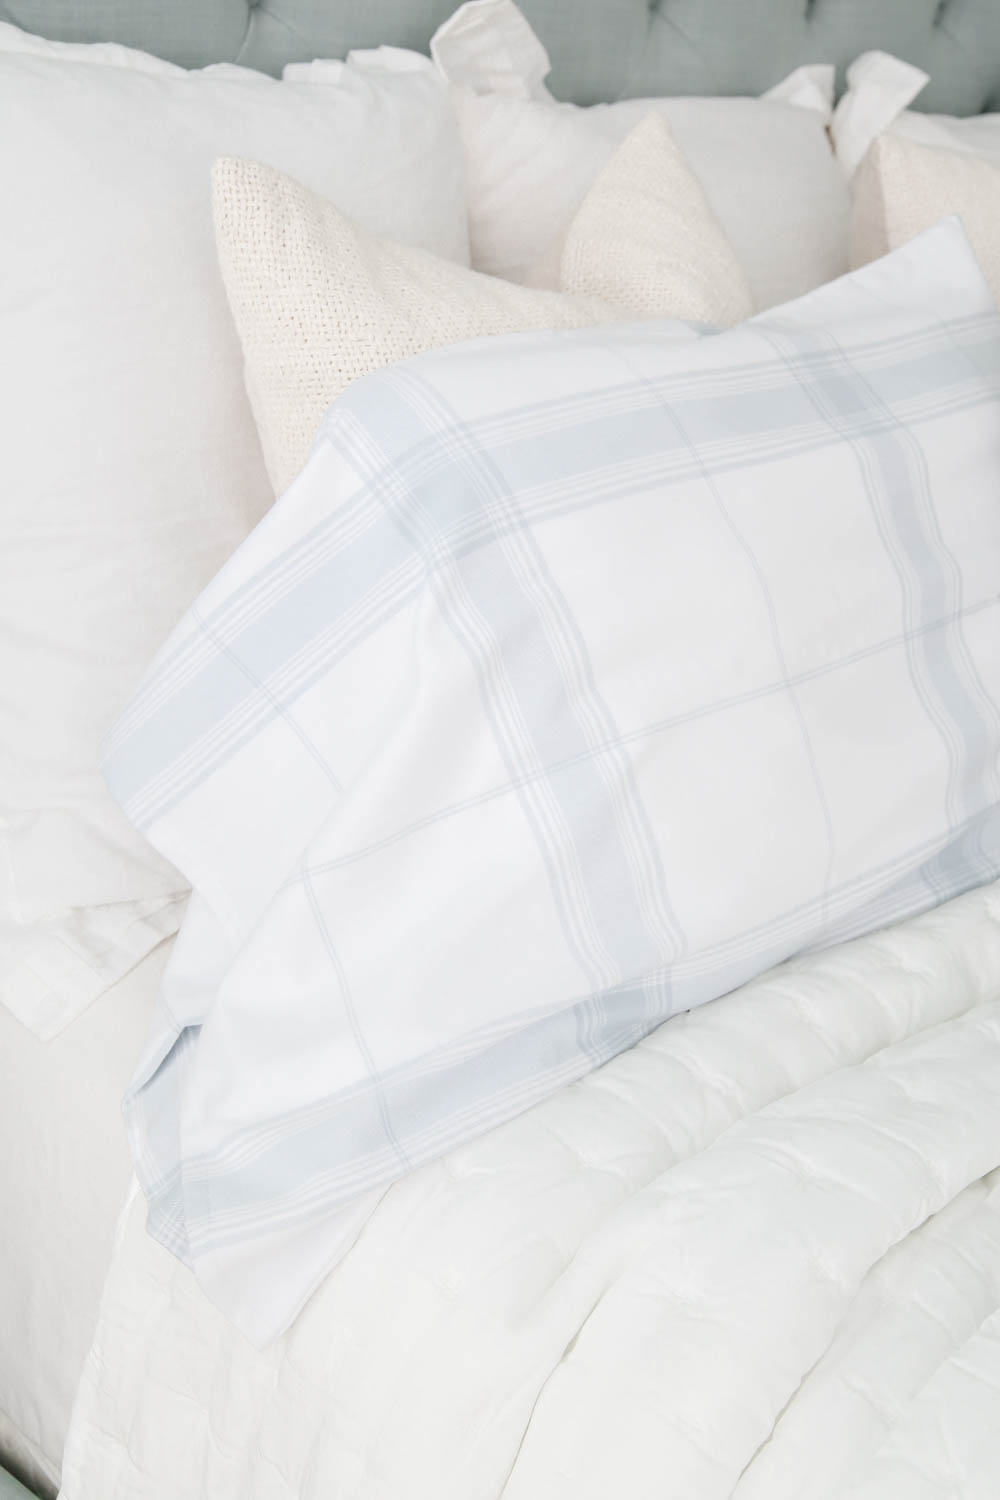 Layers of pillows in soft flannel material make a cozy bed for the season. #ABlissfulNest #bedroomdecor #bedroom